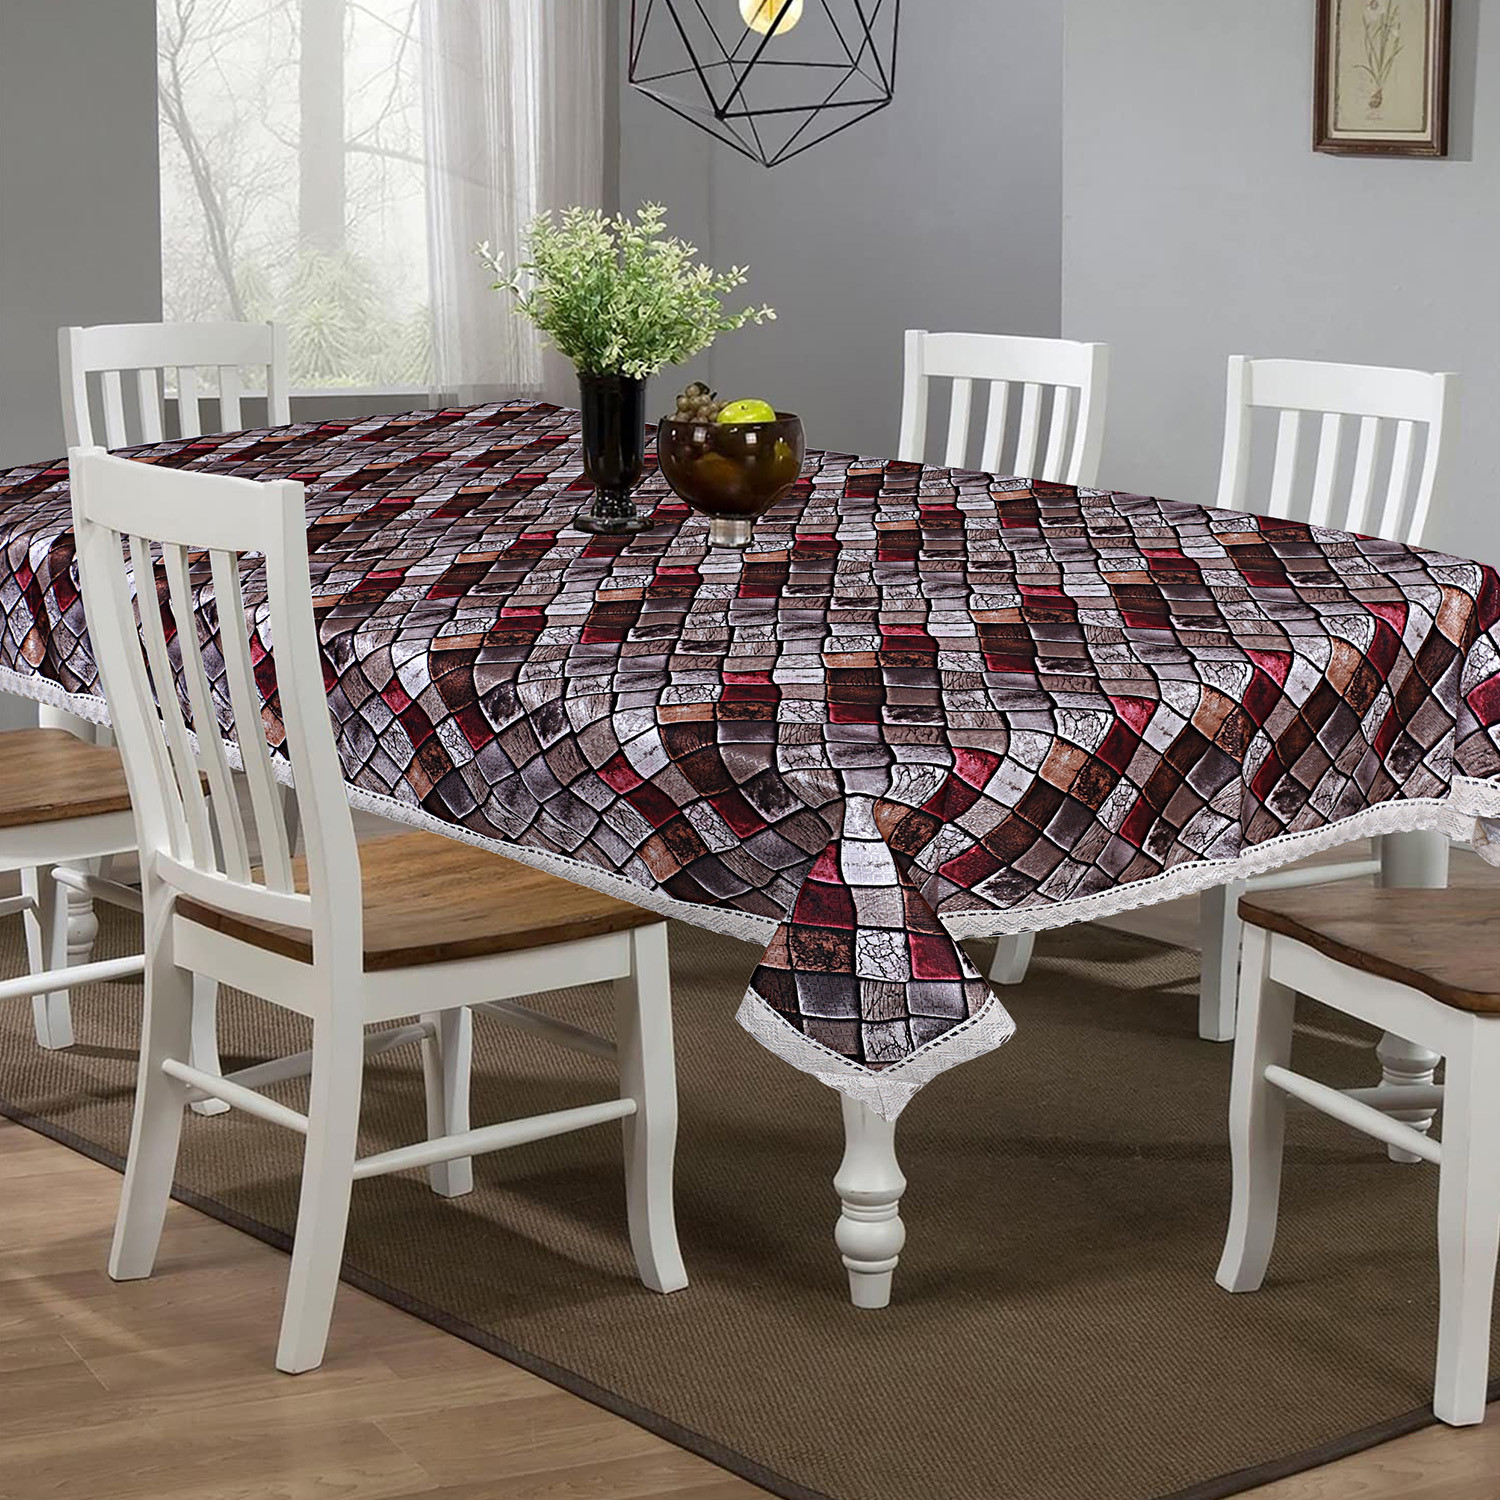 Kuber Industries Dining Table Cover|Faux Silk Spill Proof Block Pattern Tablecloth|Kitchen Dinning Protector With Jutelace Border, 60X90 Inch (Multicolor)